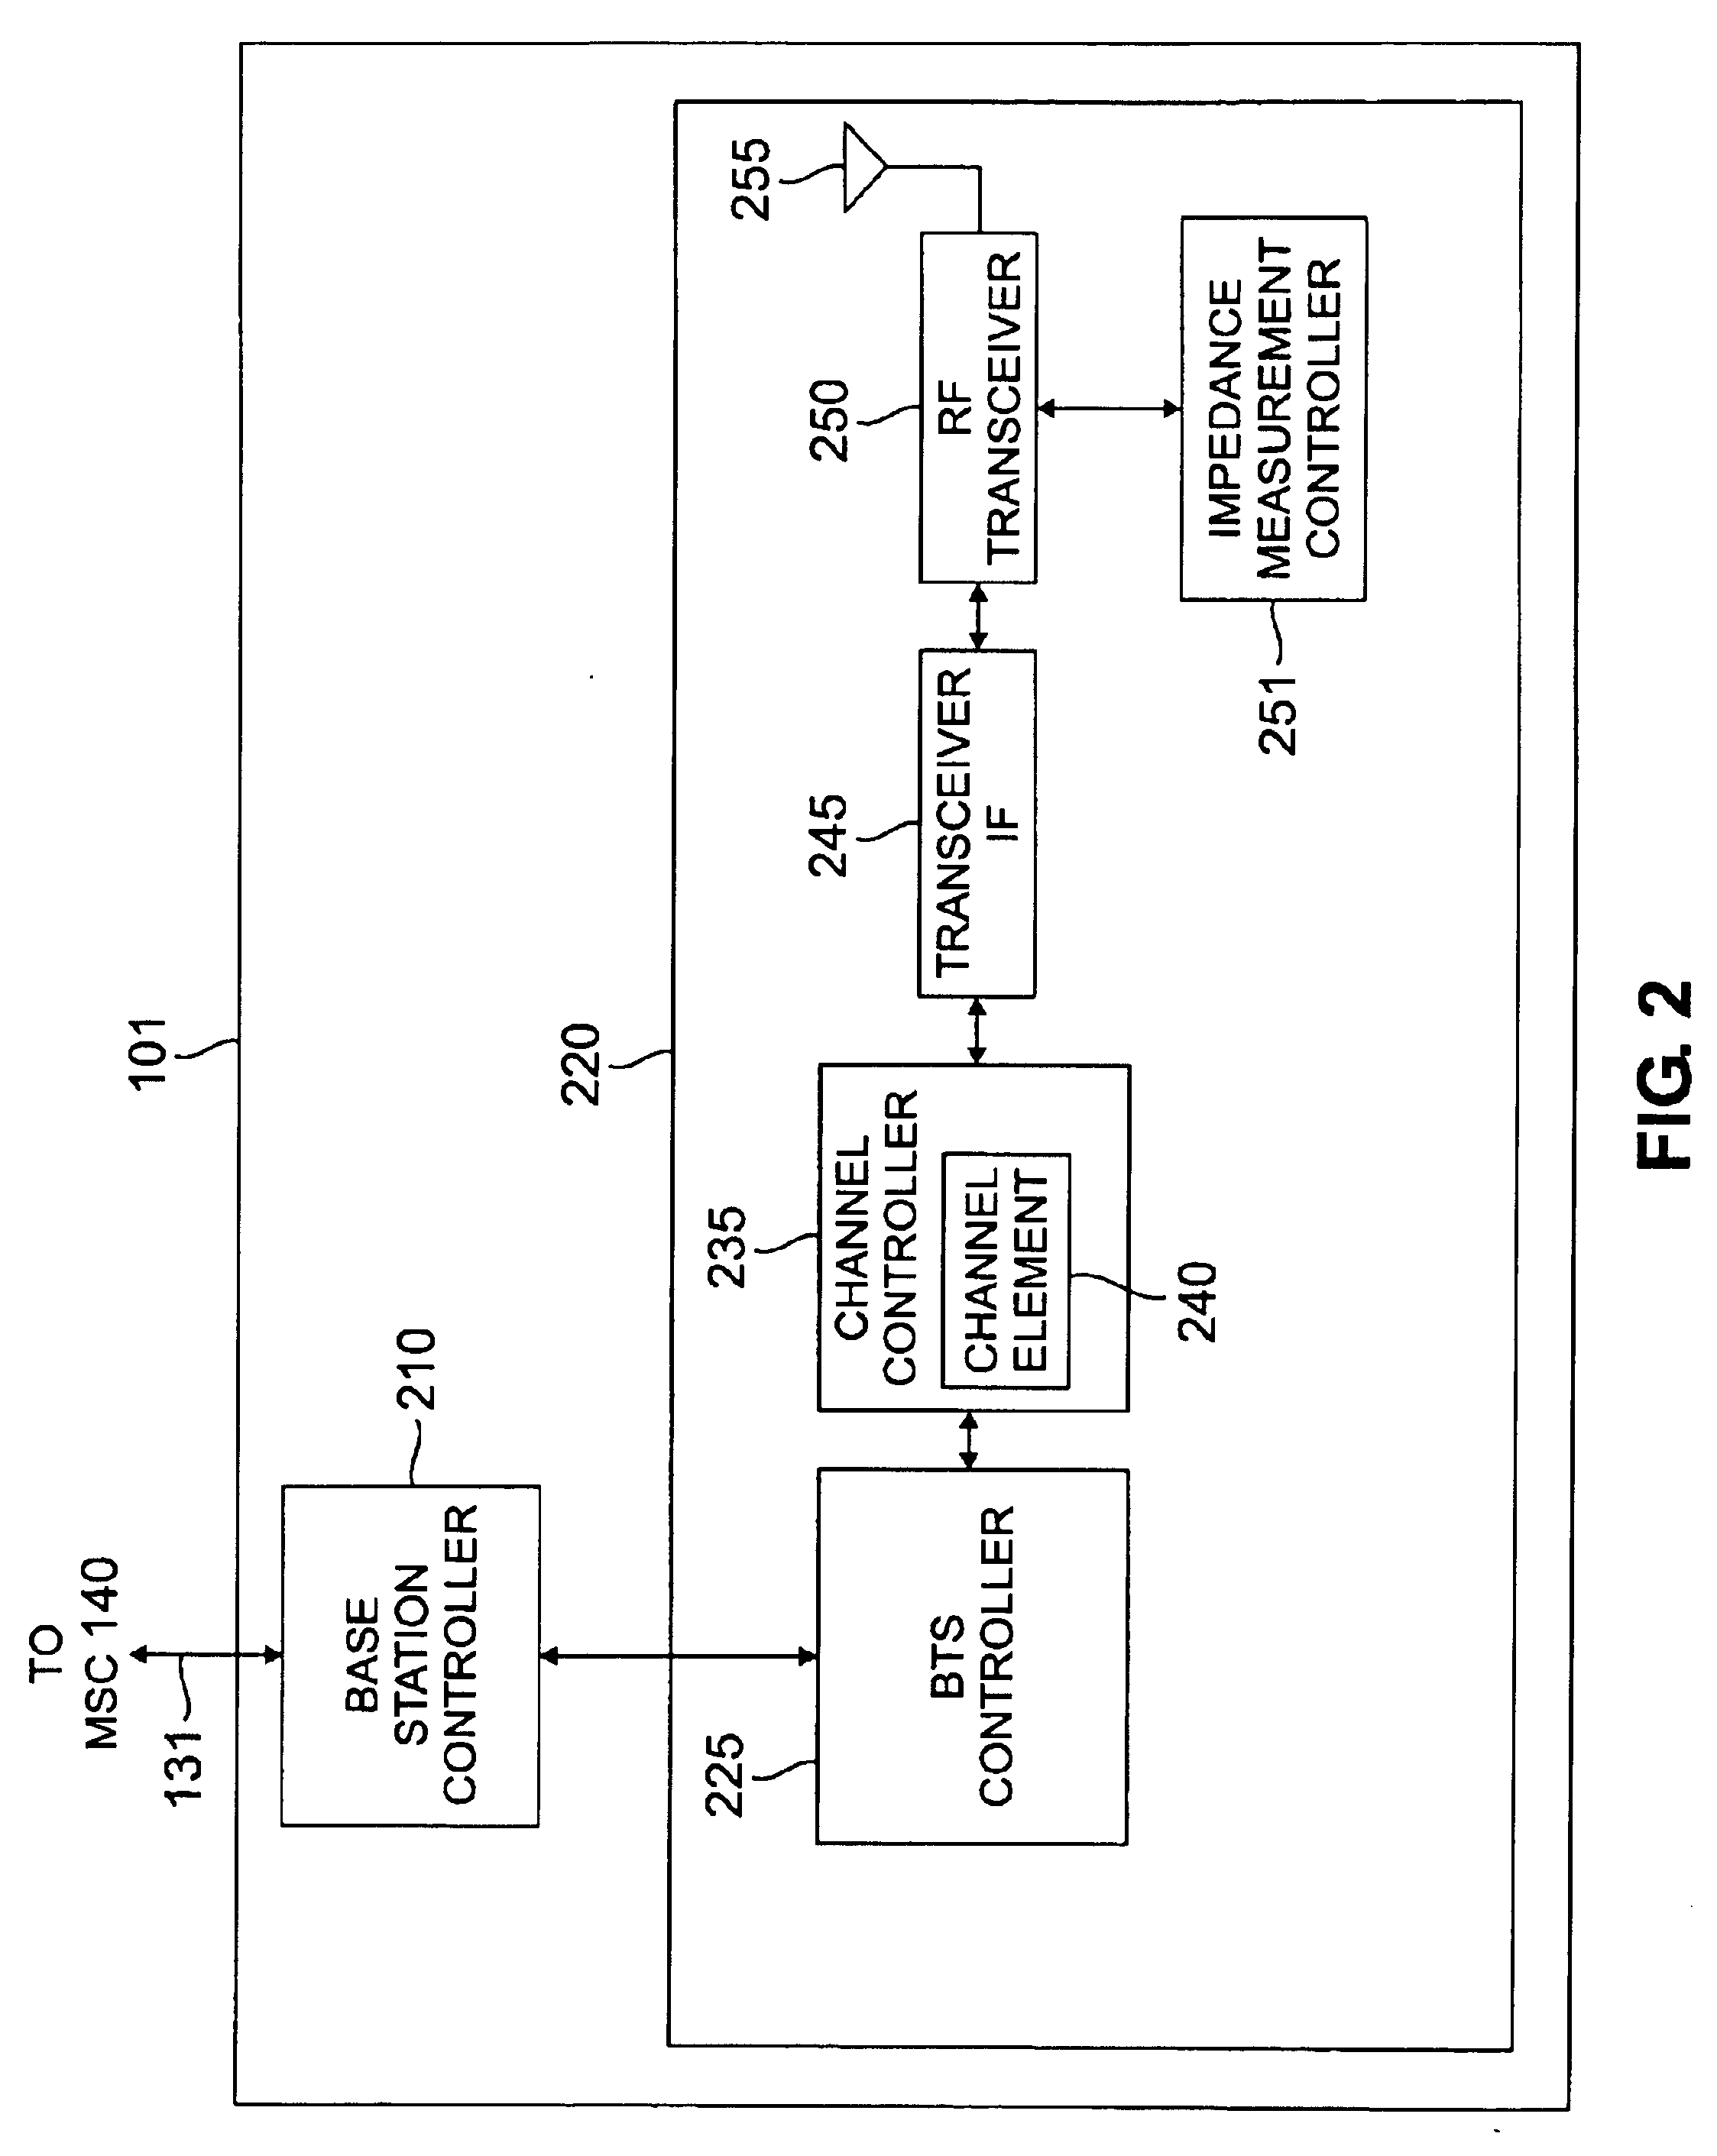 High accuracy receiver forward and reflected path test injection circuit